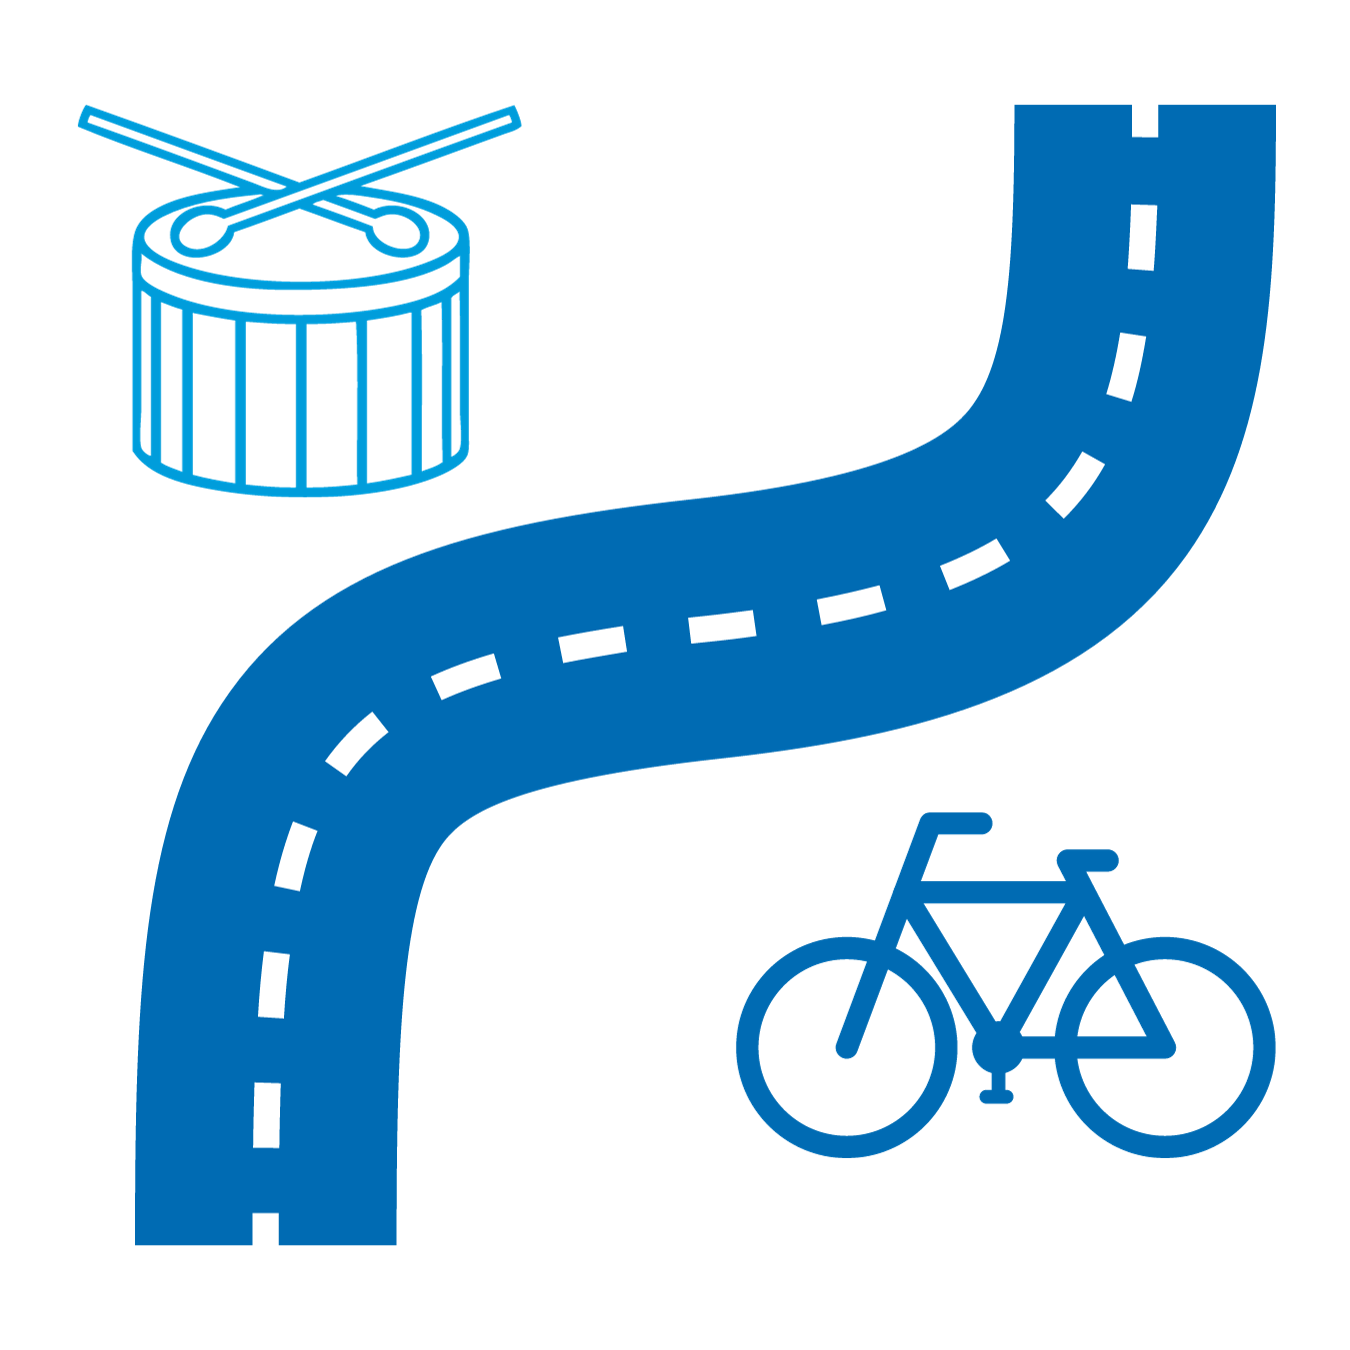 Winding road with drum and bicycle icon